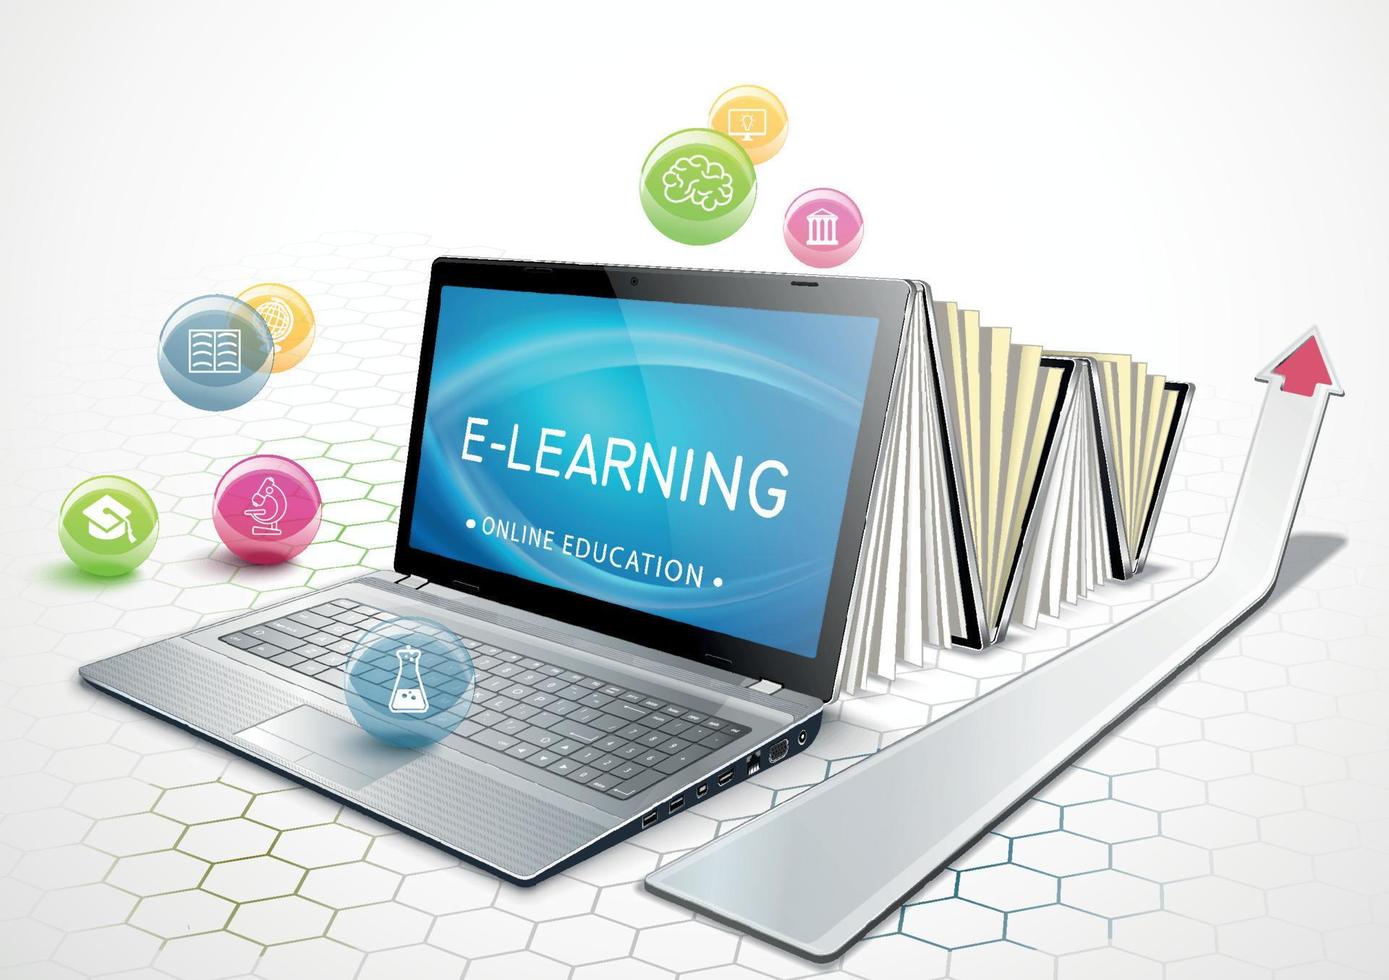 The concept of e-learning. Education online. Laptop as an ebook. Getting an education. Vector illustration.